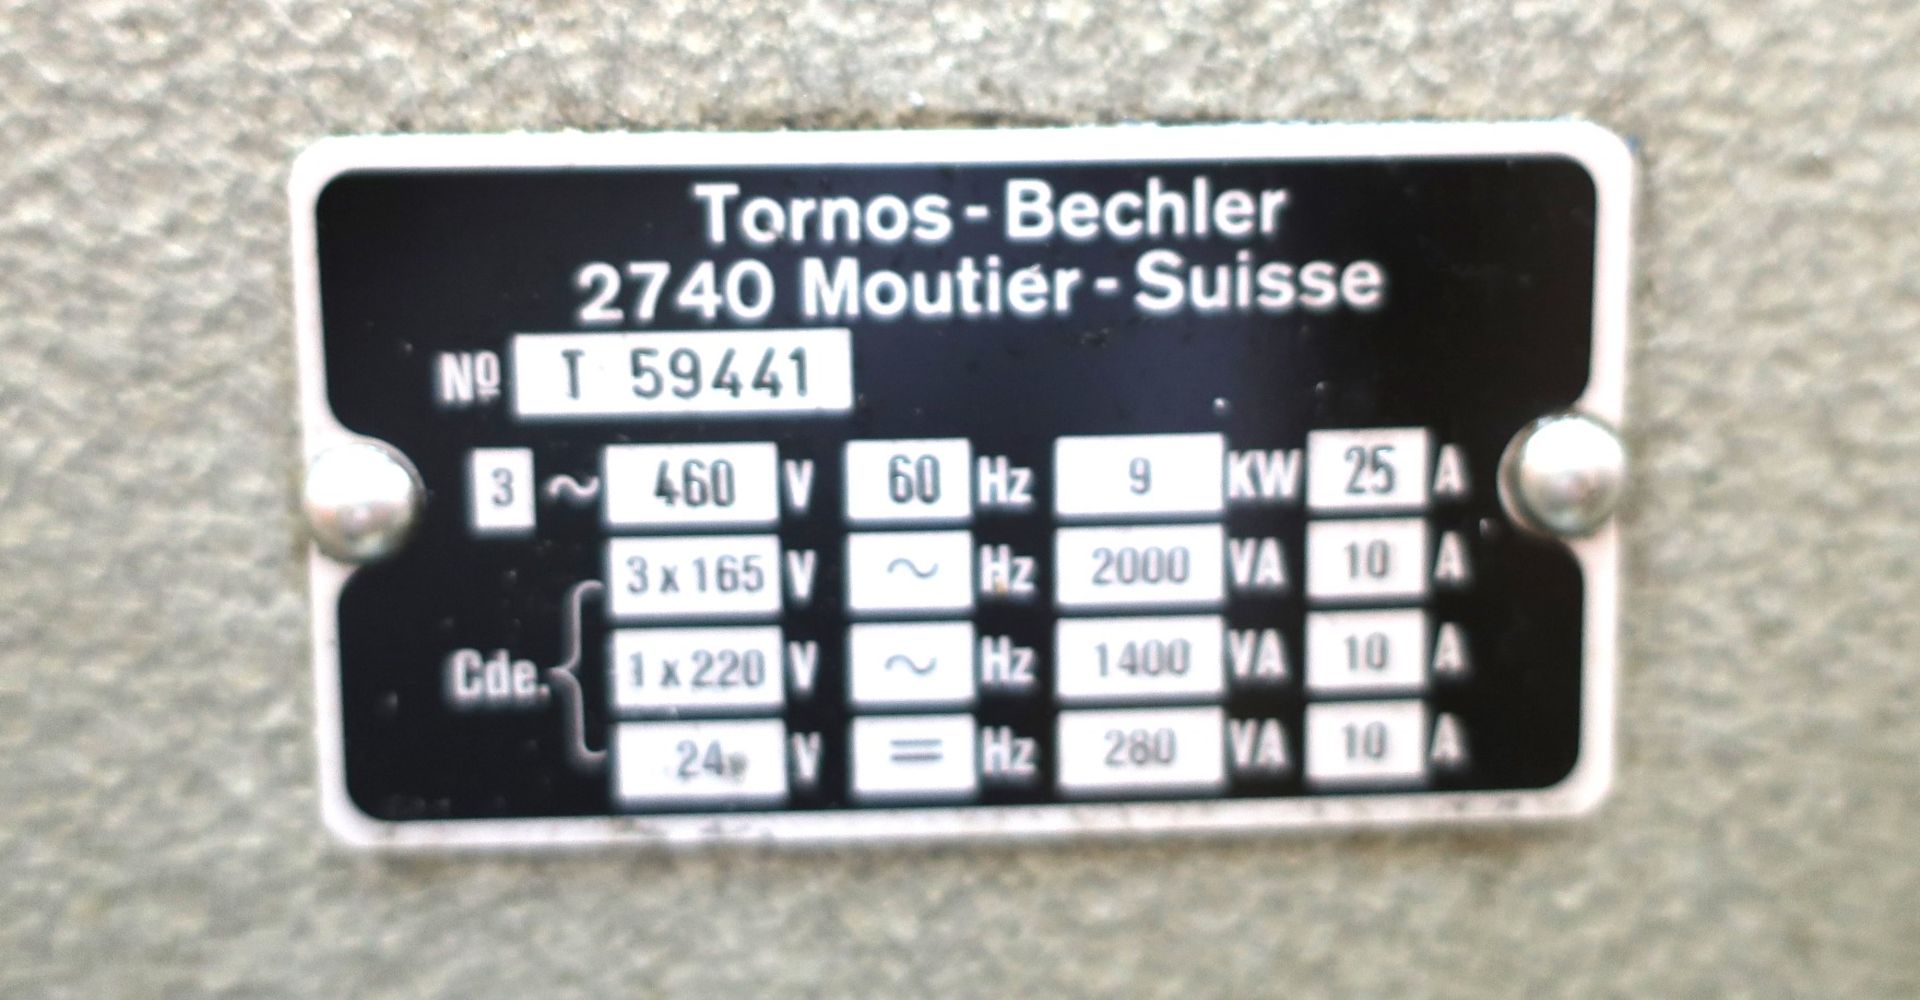 TORNOS SAS-16-DC MULTIPLE SPINDLE AUTOMATIC BAR MACHINE, S/N T59441 - Image 9 of 10